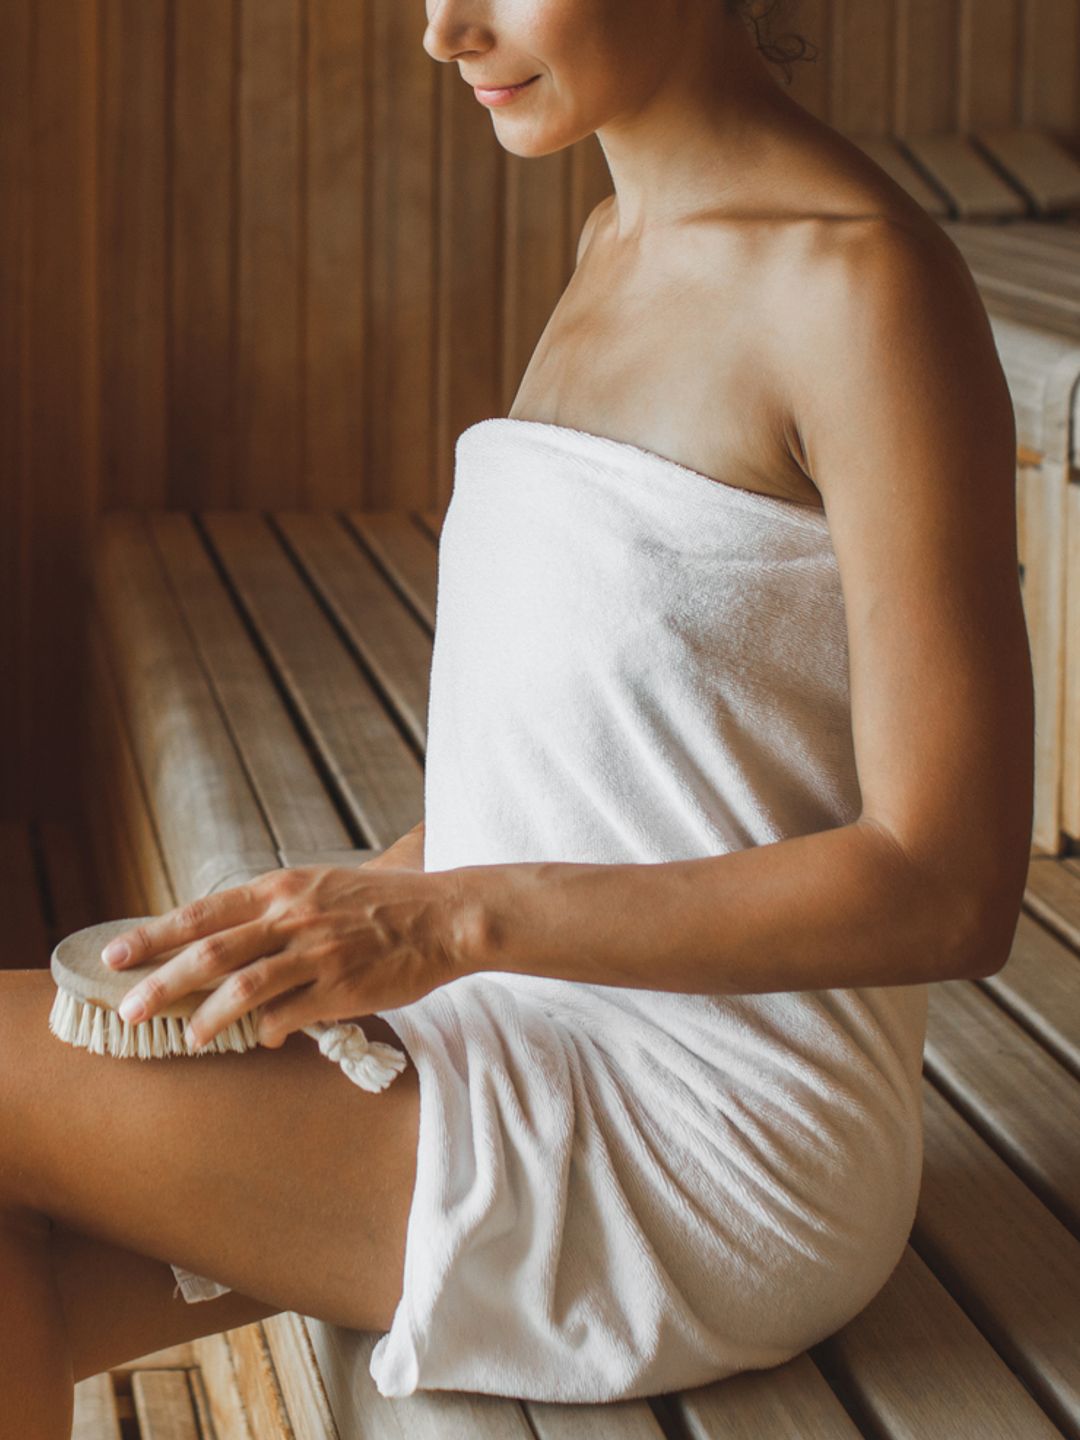 Body brushing has been used for centuries to promote healthier skin